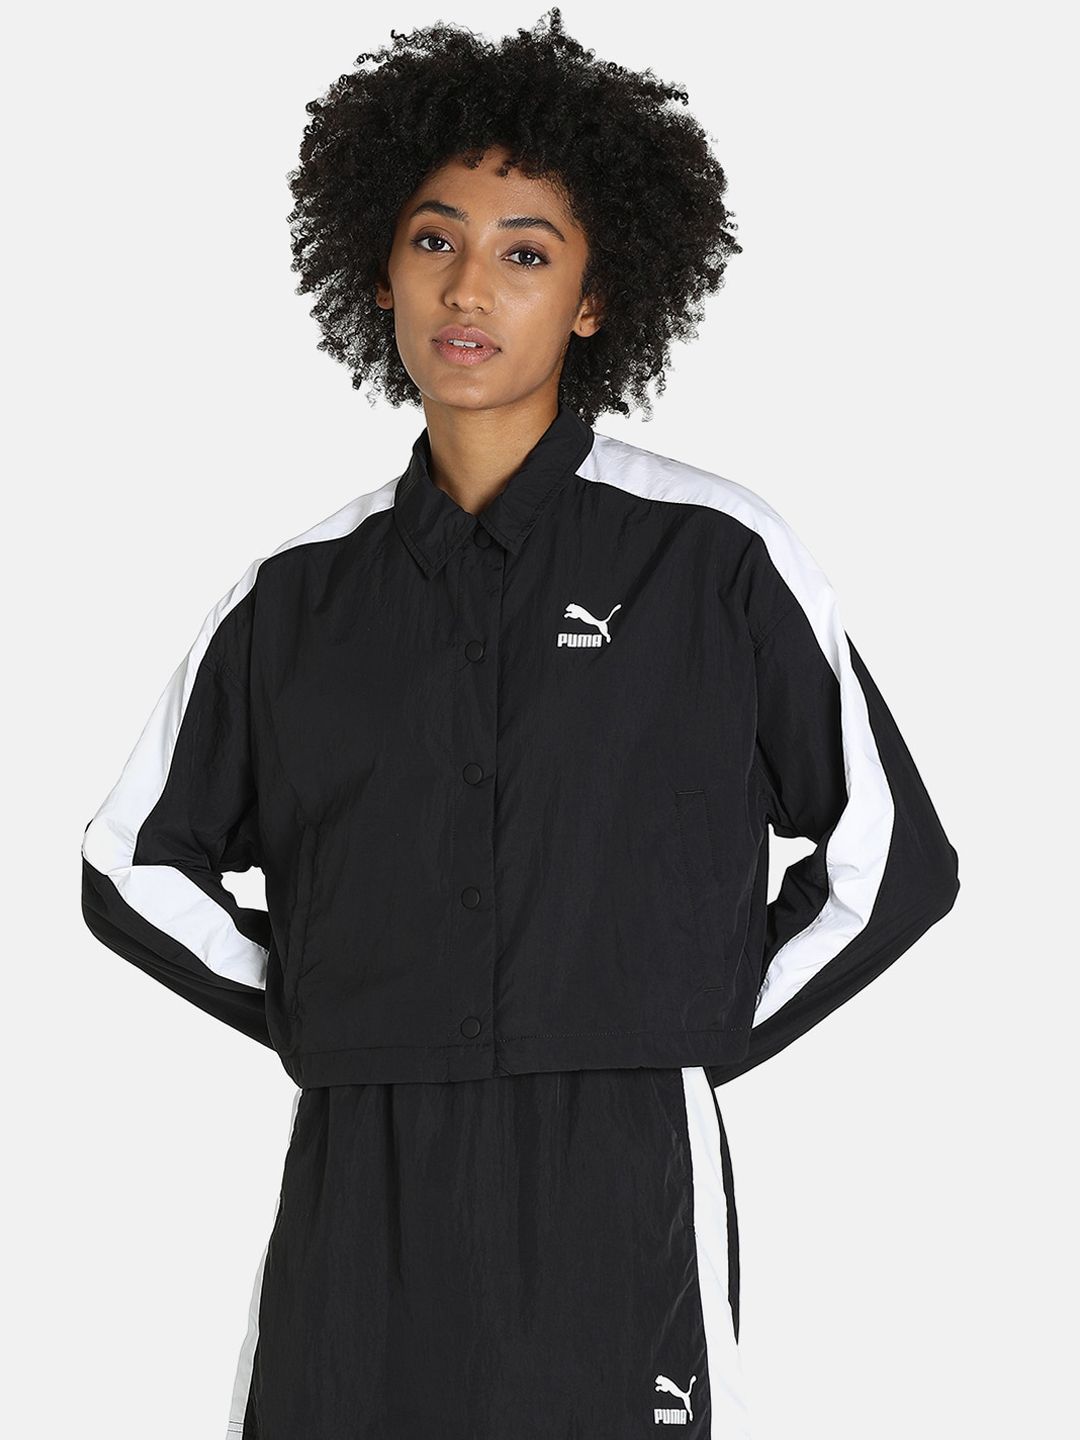 Puma Women Black & White Colorblocked Jackets Price in India